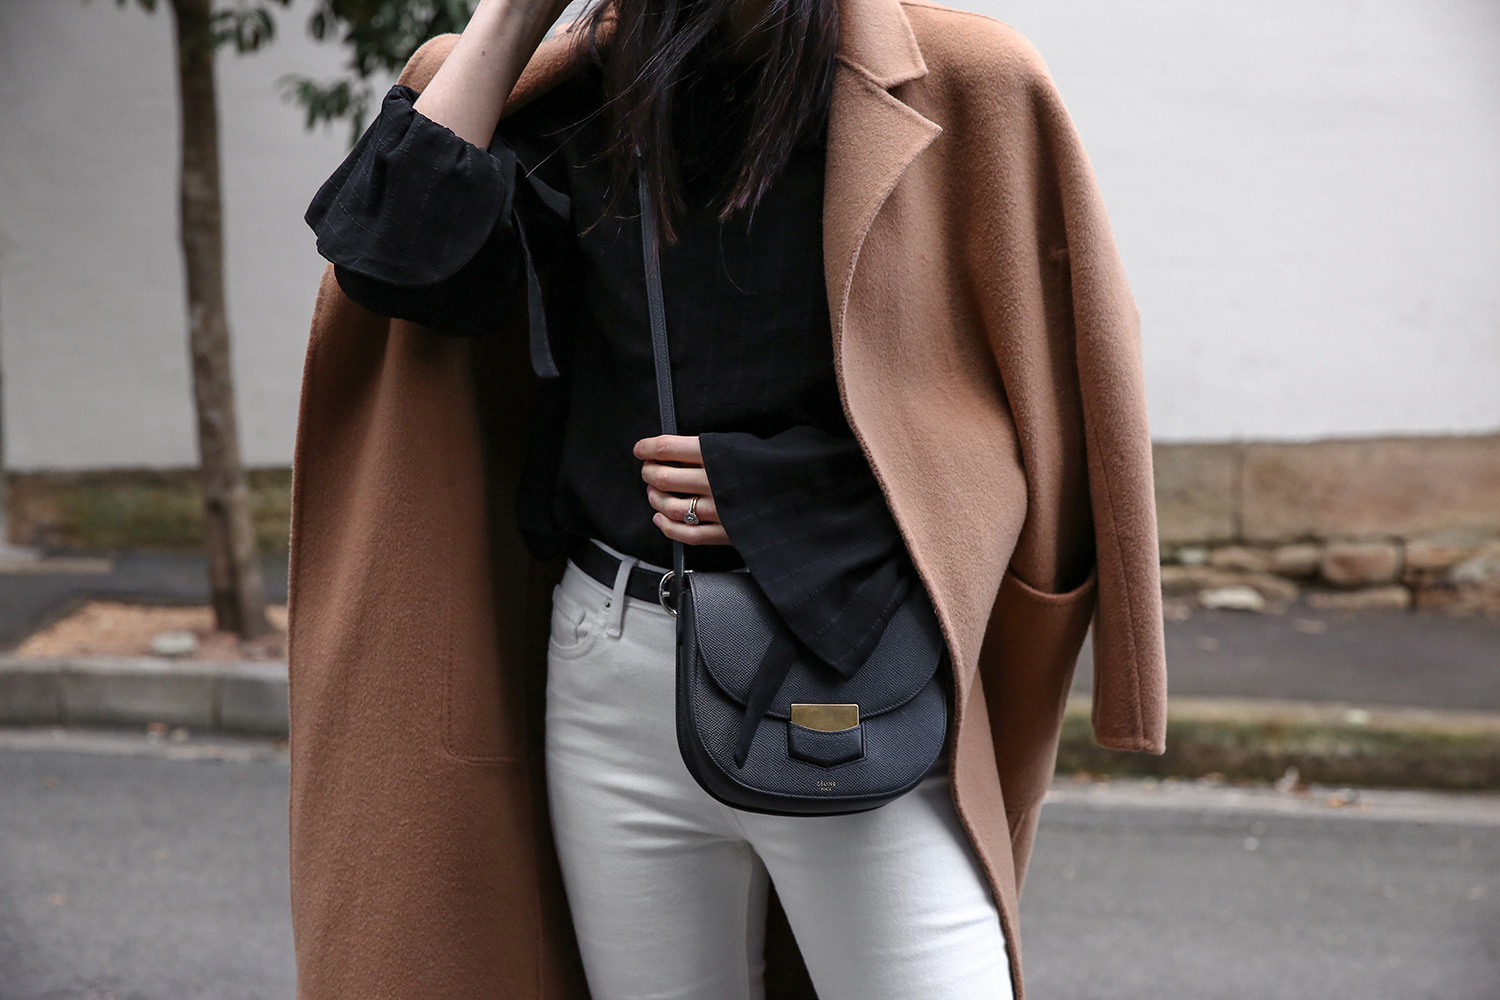 Jamie Lee of Mademoiselle wearing a Scandi style outfit and a Celine trotteur bag